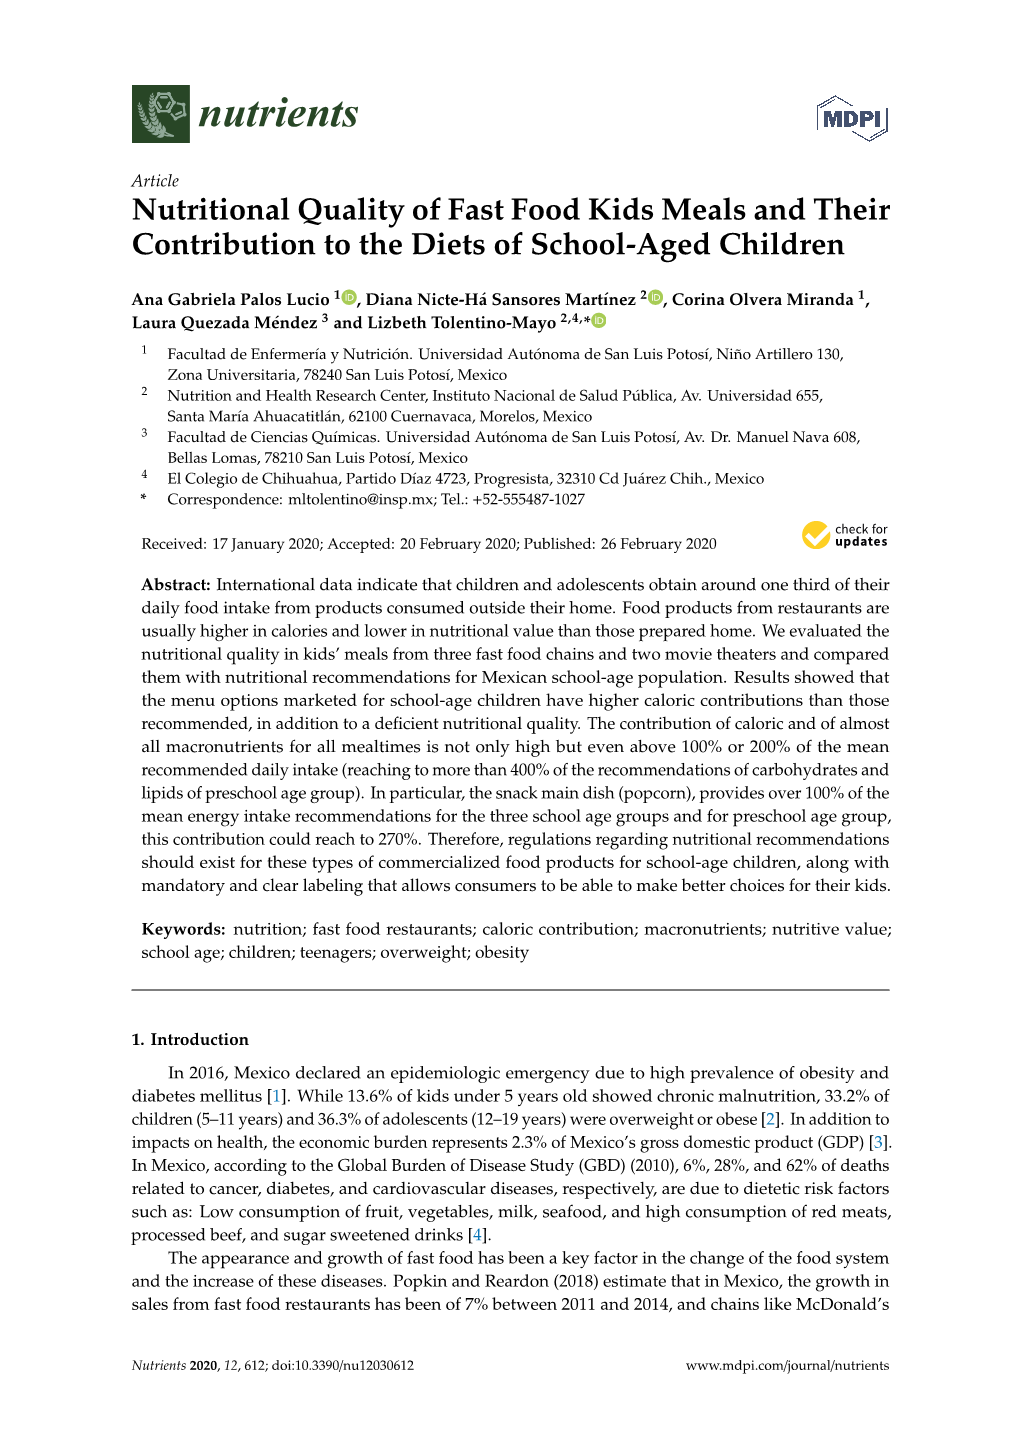 Nutritional Quality of Fast Food Kids Meals and Their Contribution to the Diets of School-Aged Children